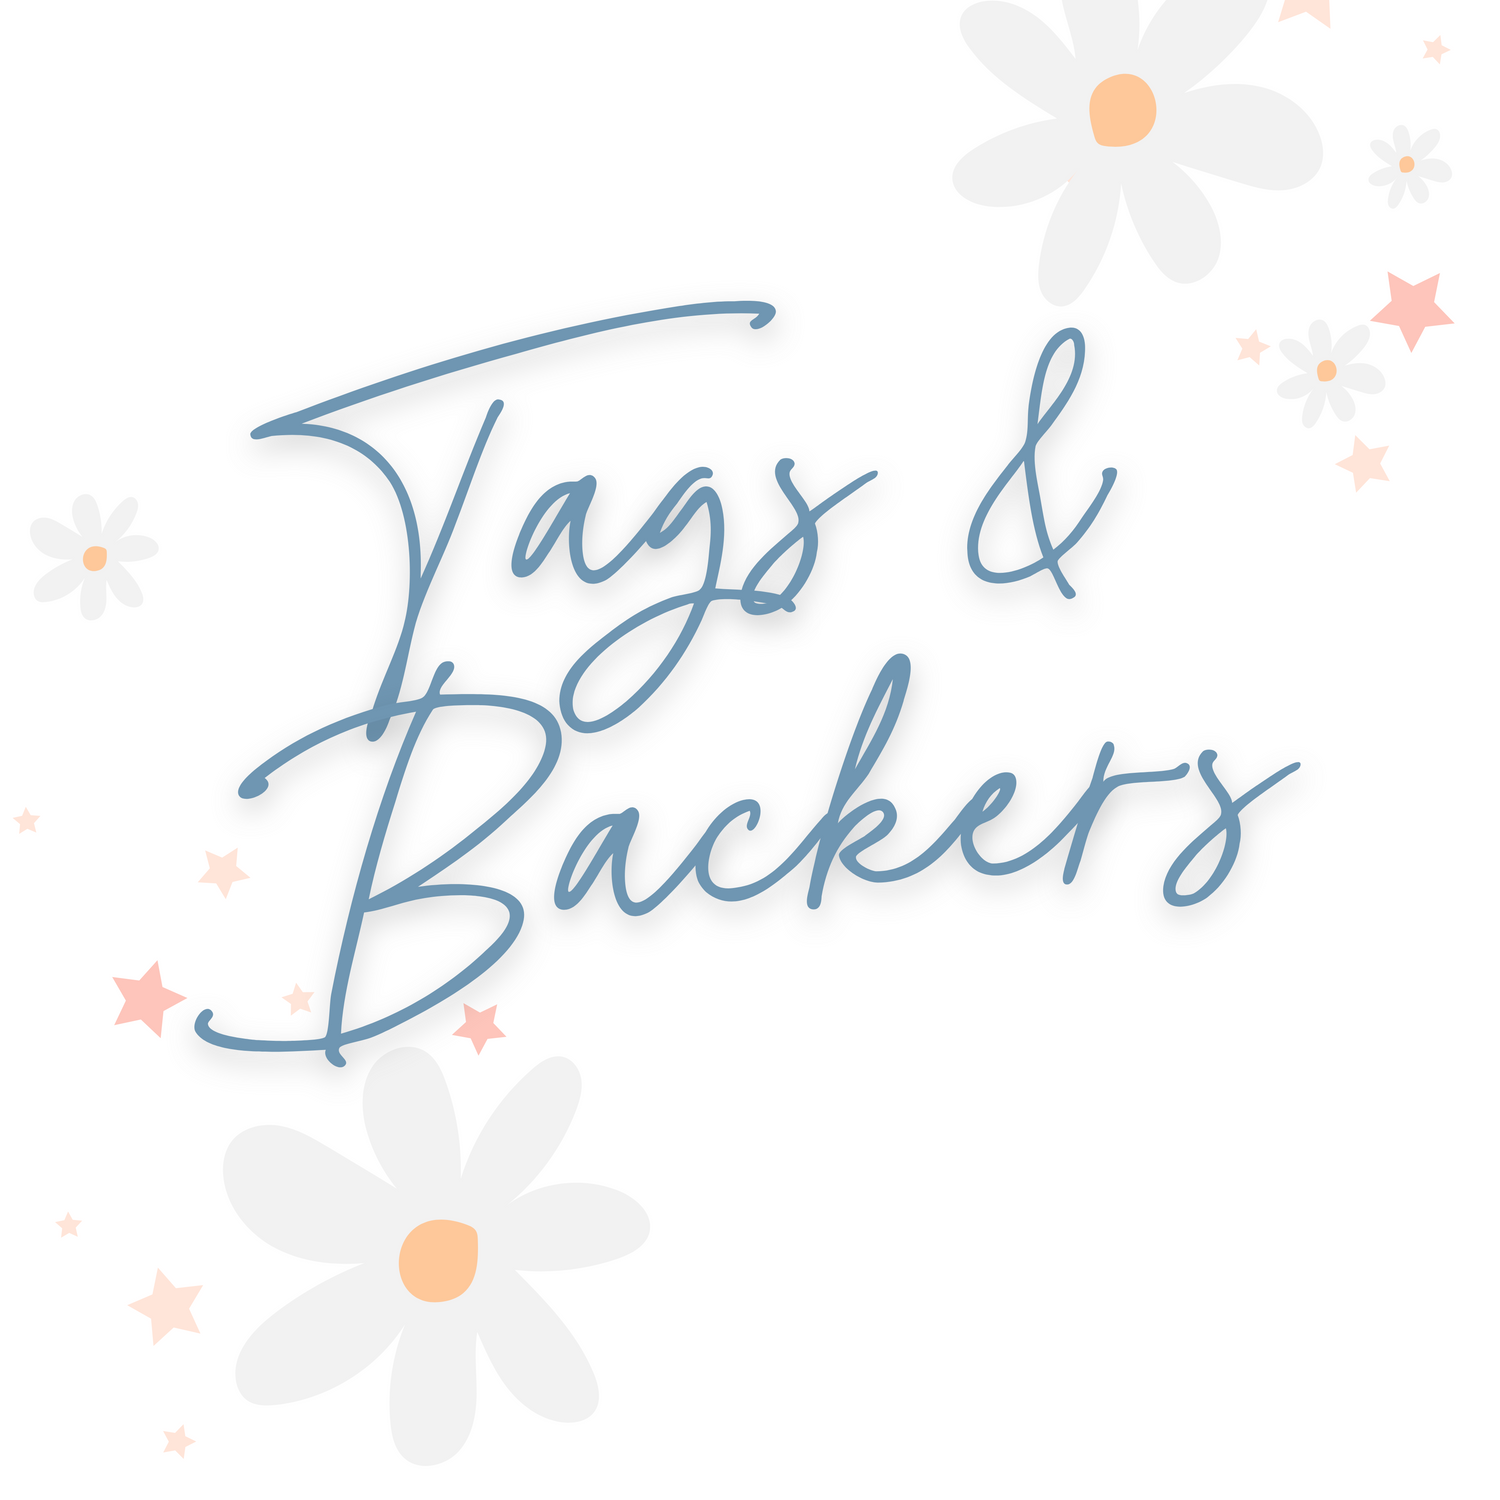 Tags & Backers